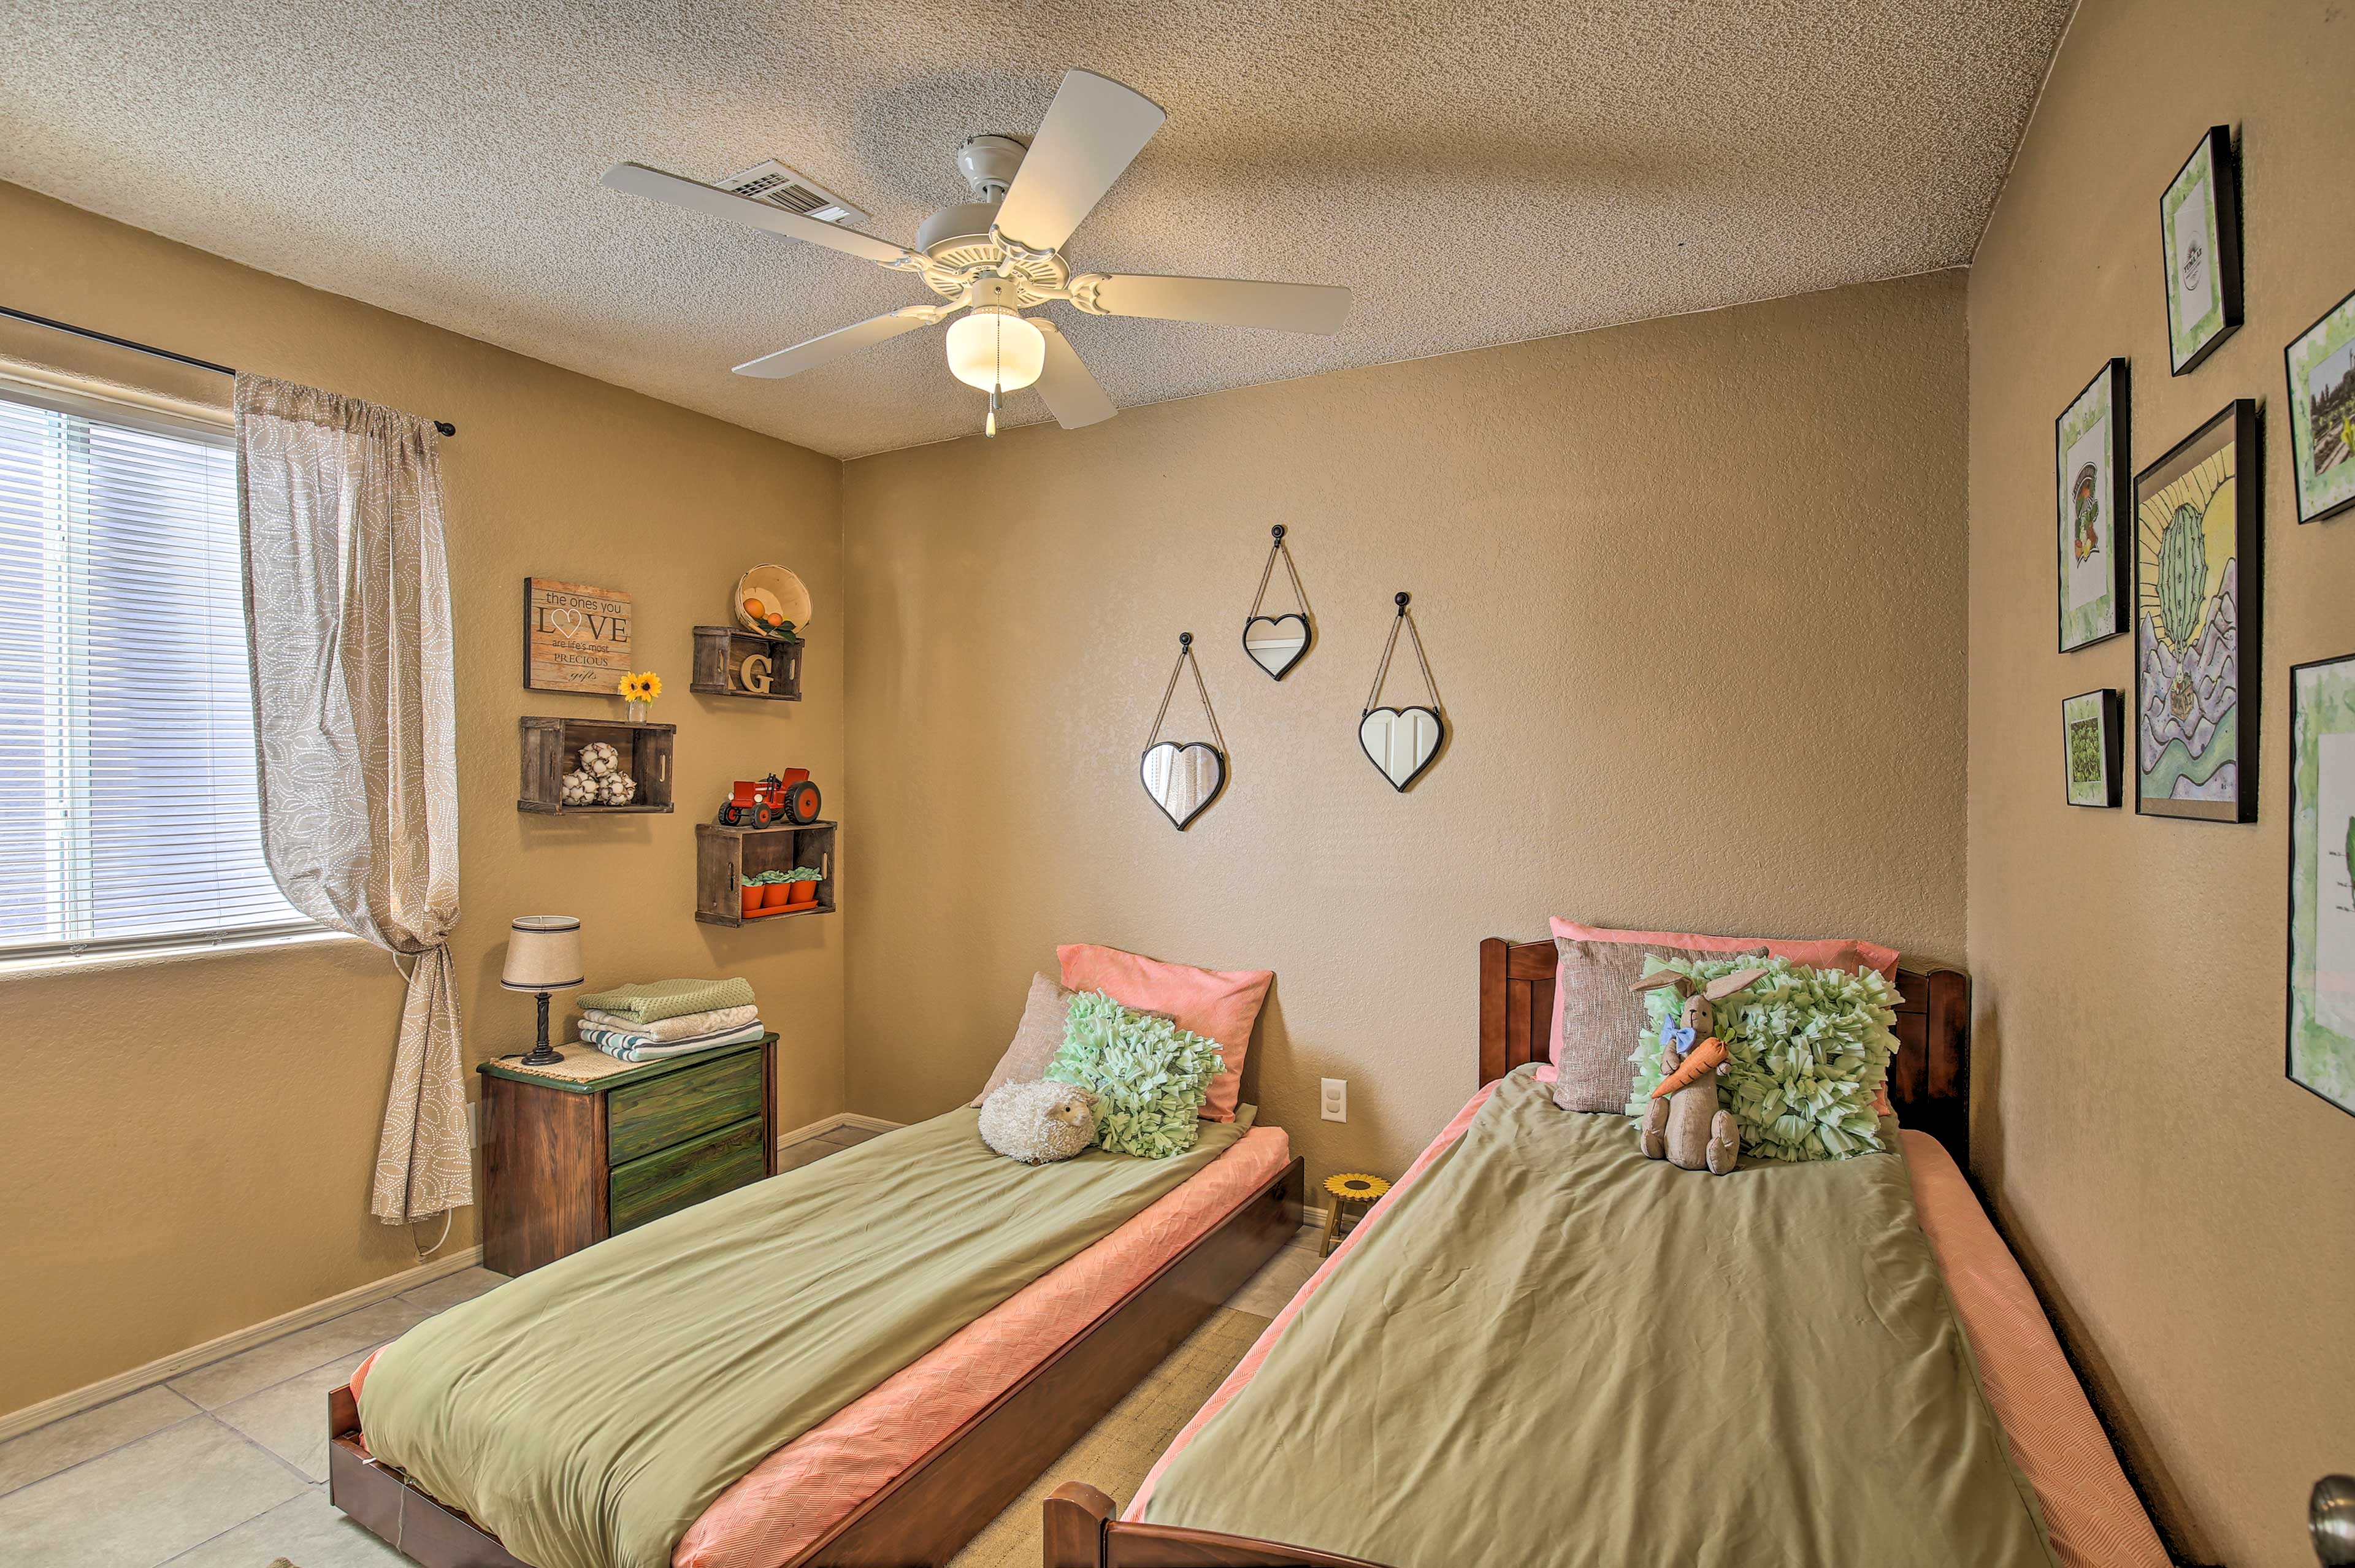 The third bedroom offers 2 twin beds.